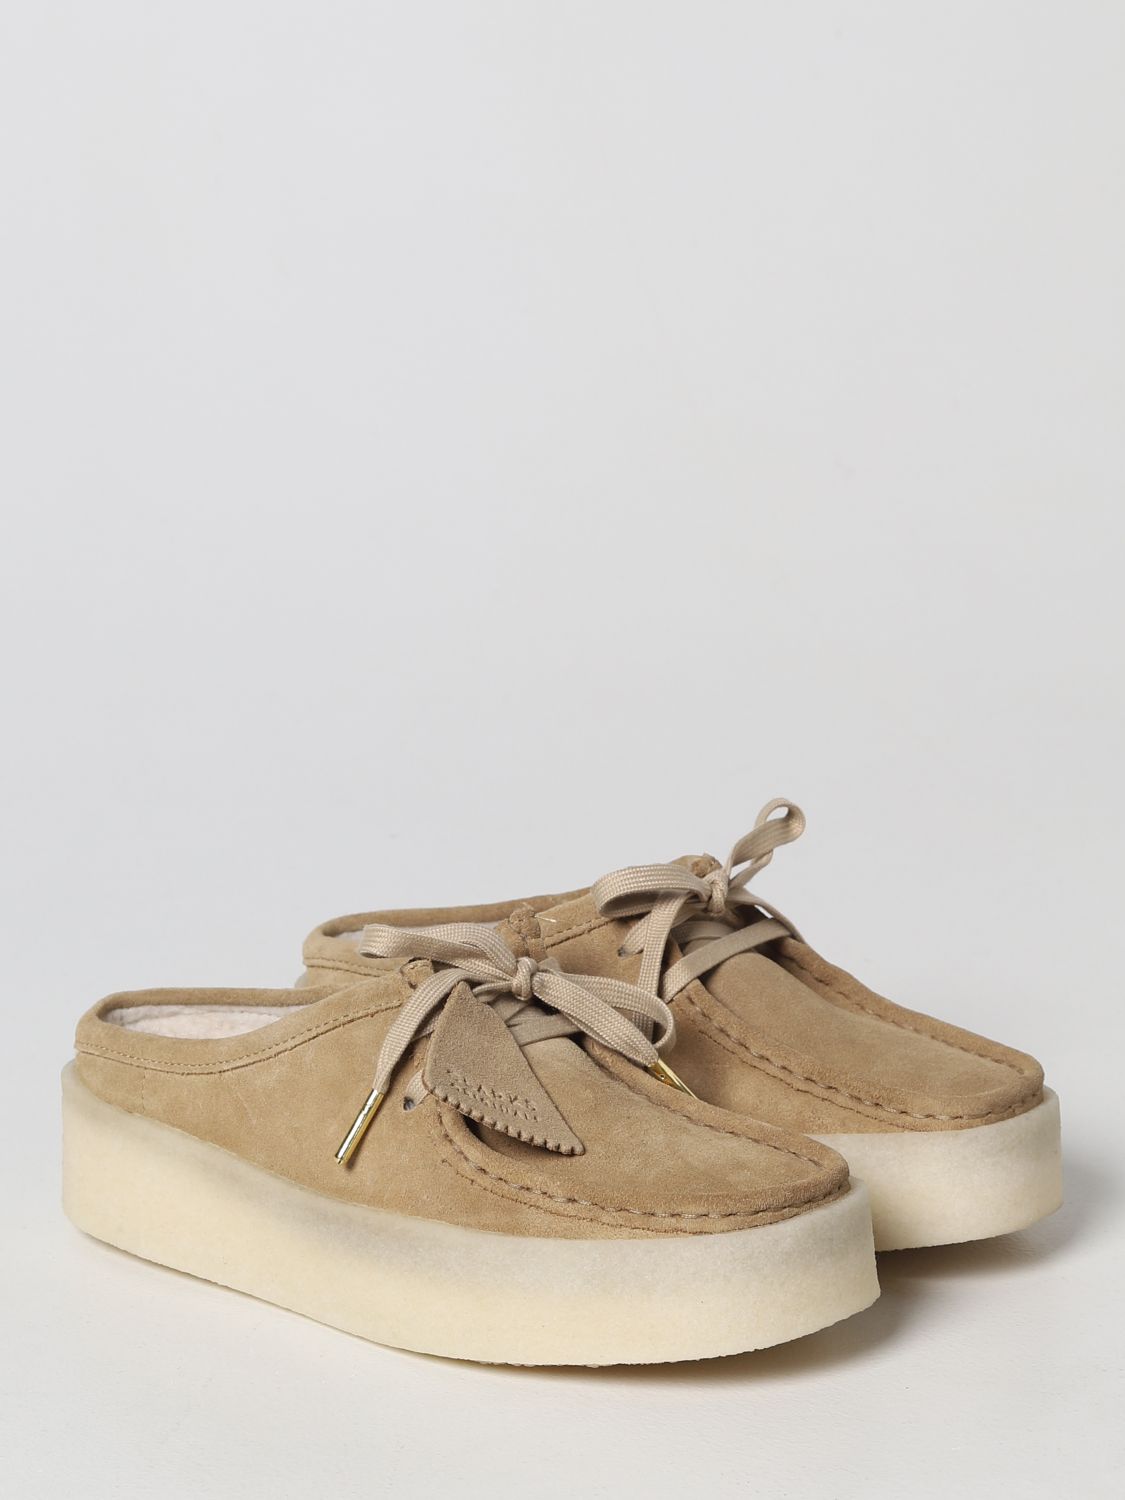 Clarks Originals Outlet: flat shoes for woman - Beige Clarks Originals flat 168636 on GIGLIO.COM